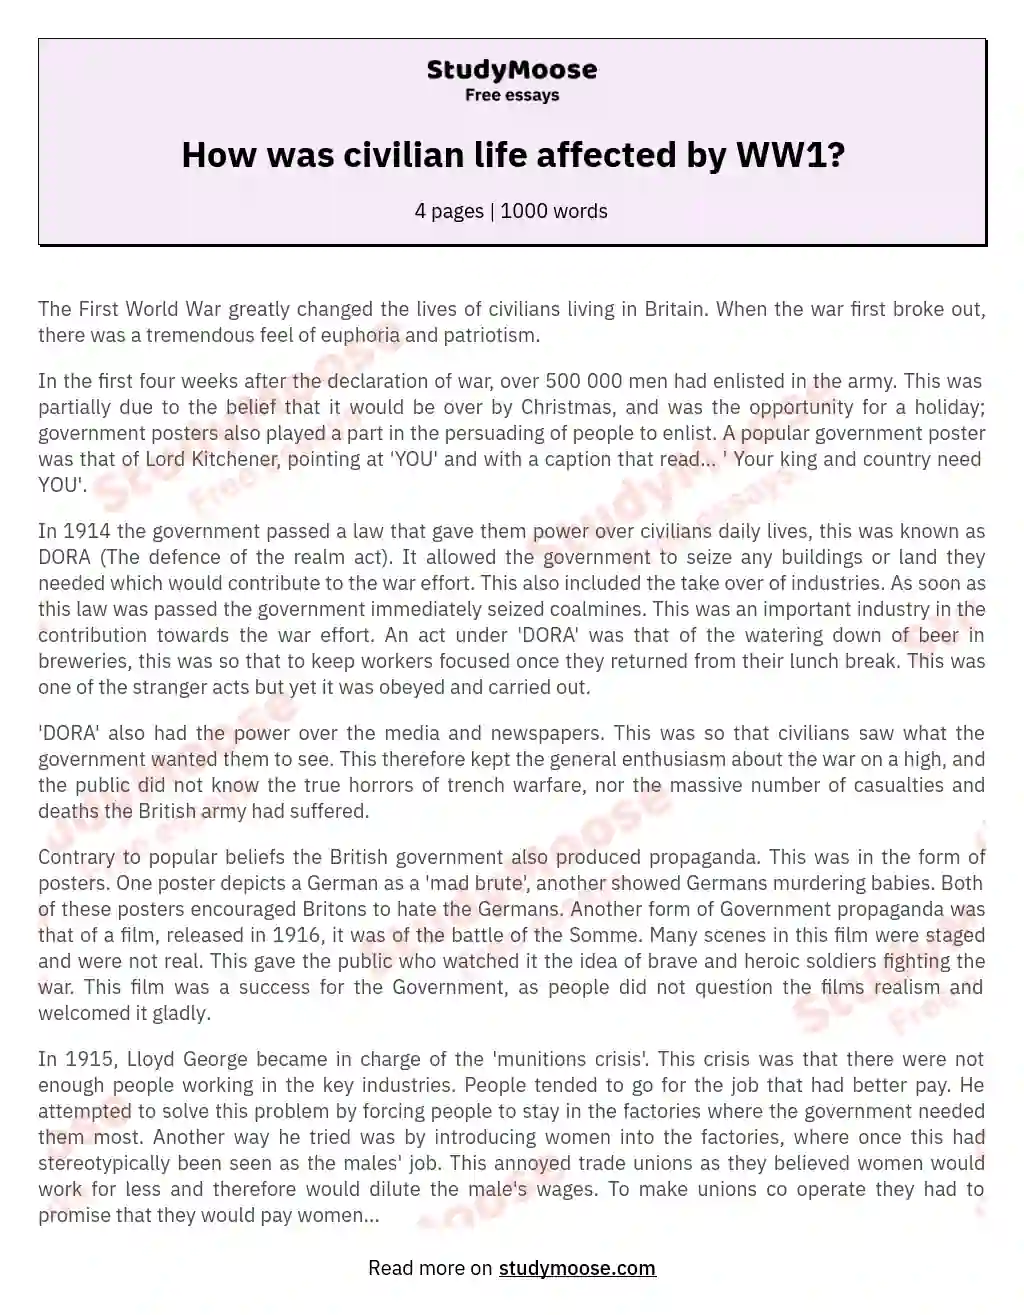 How was civilian life affected by WW1? essay